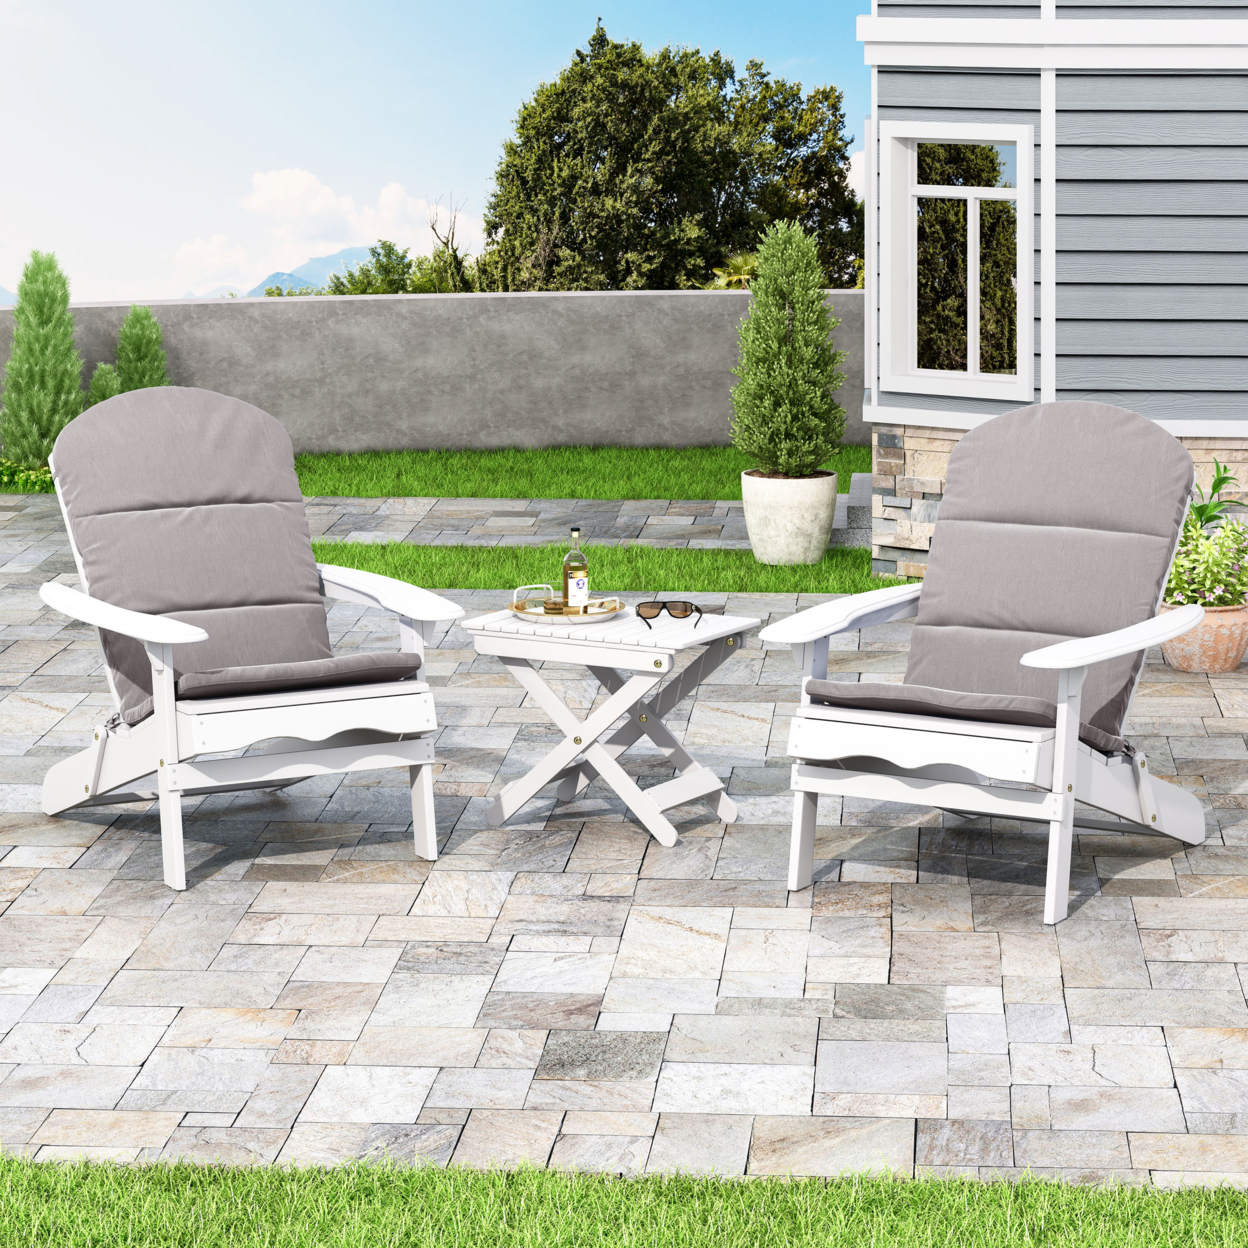 Reed Outdoor 2 Seater Acacia Wood Chat Set With Water Resistant Cushions - White/gray